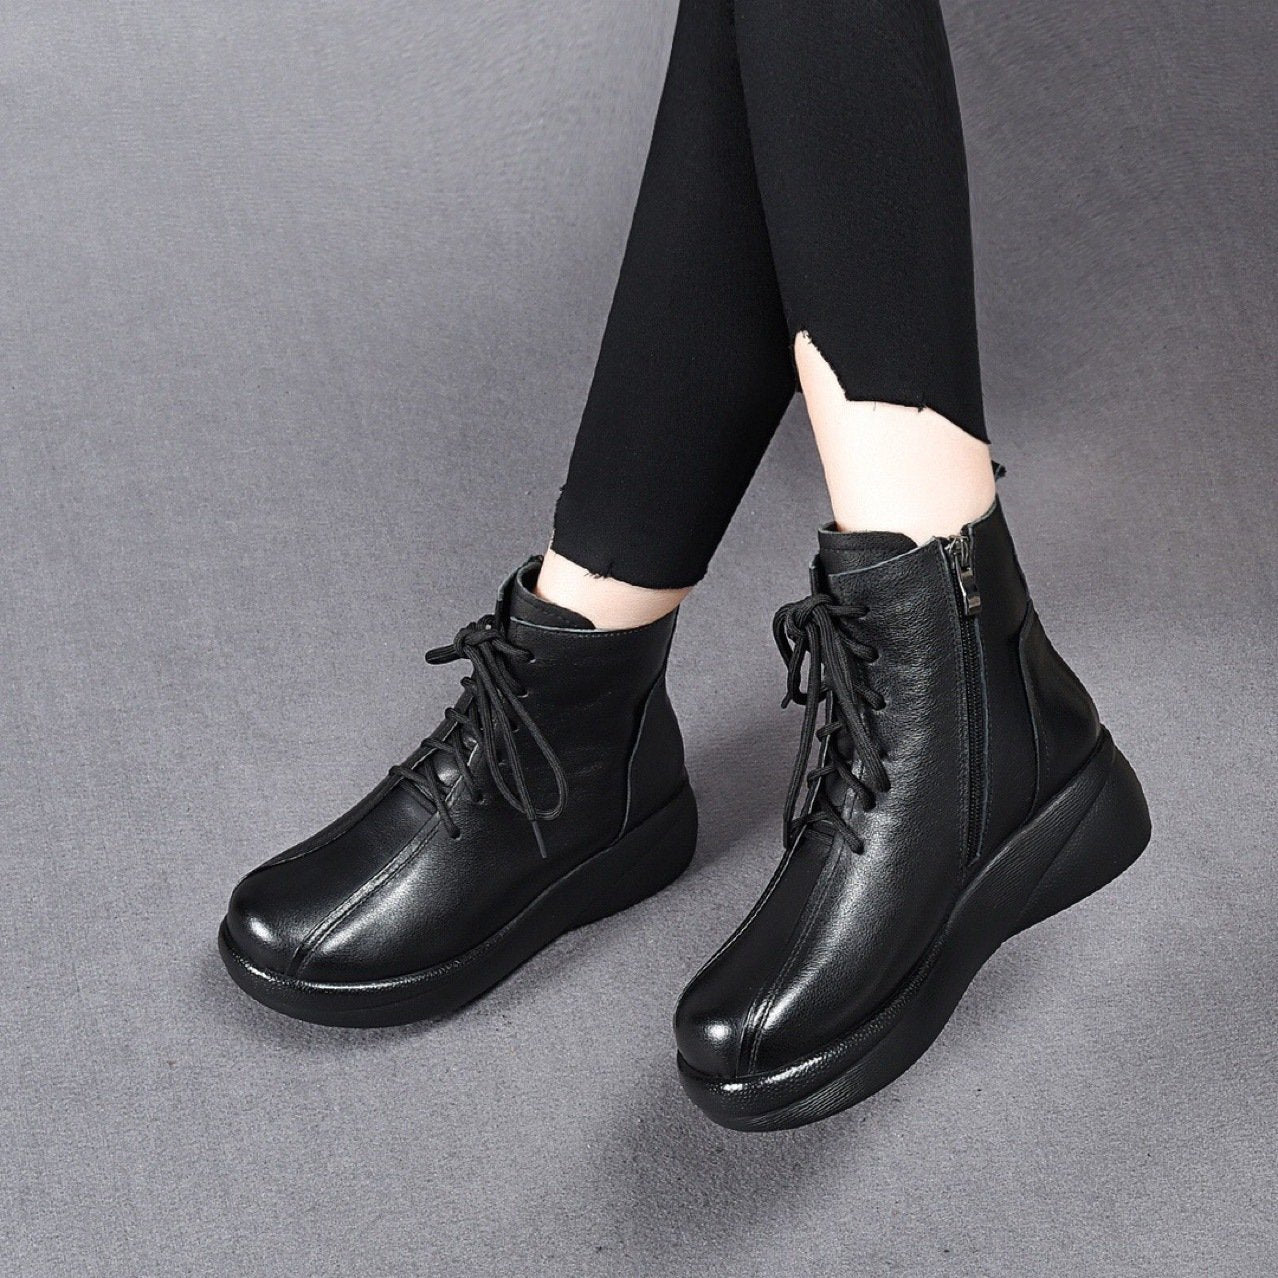 Waterproof and Durable Handmade Leather Ankle Boots